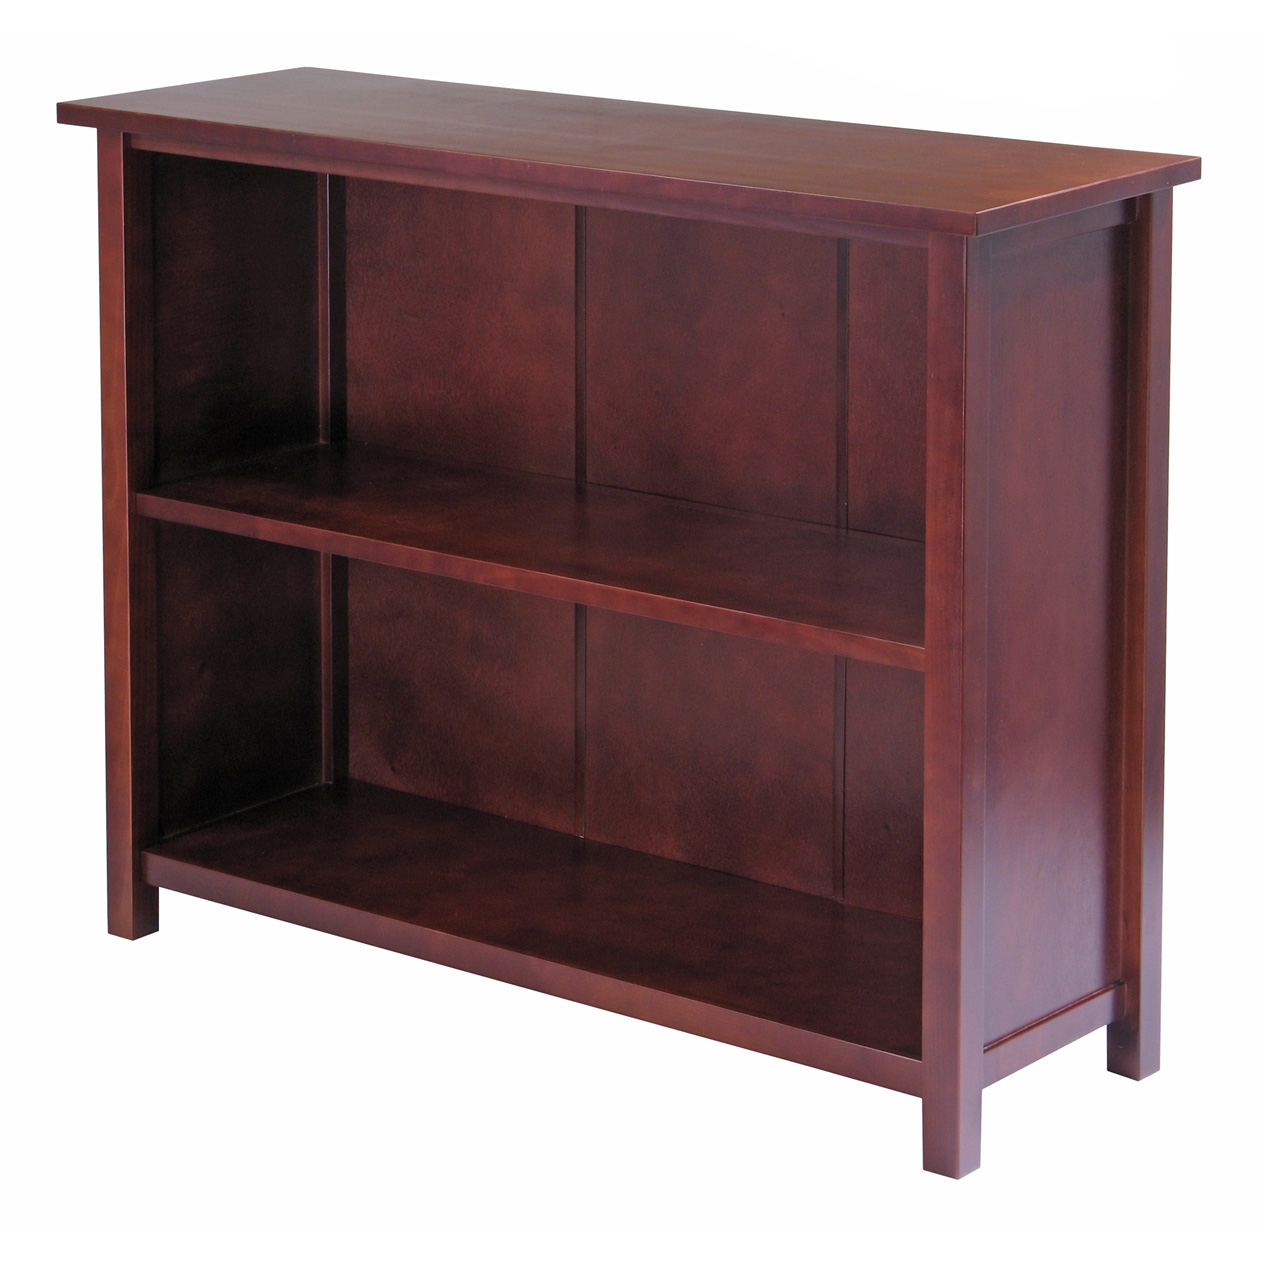 Winsome Wood Milan Storage Shelf or Bookcase, 3-Tier, Long